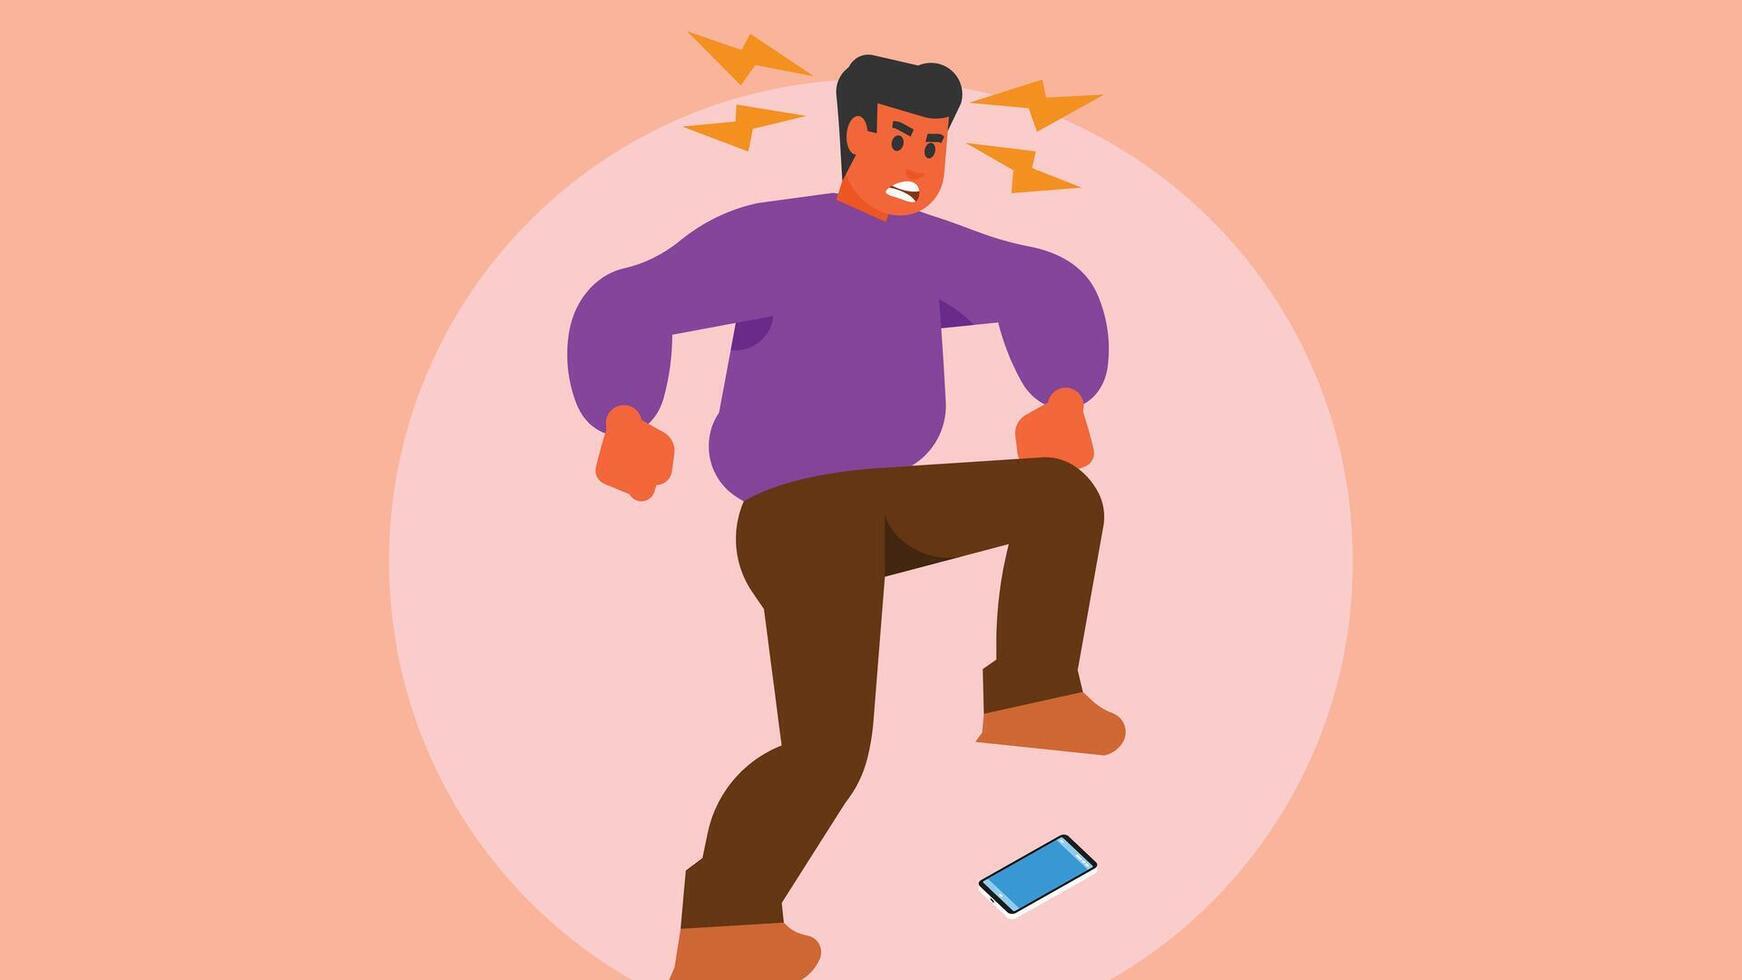 Angry man drops the phone and smash it on ground illustration vector